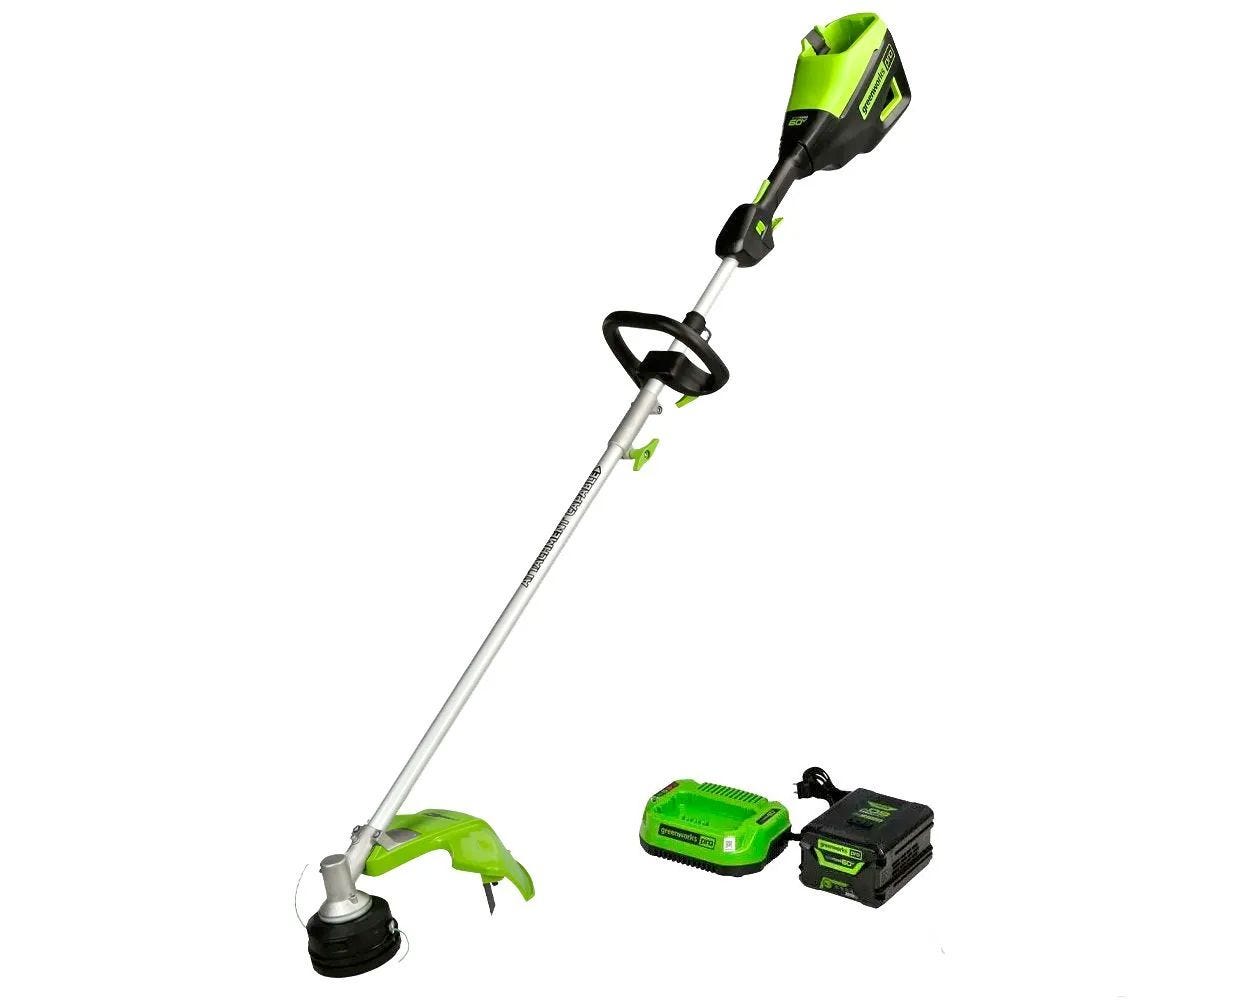 60V 16" Cordless Battery String Trimmer (Attachment Capable) & 16" Hedge Trimmer Attachment Combo Kit w/ 4.0 Ah Battery & Charger